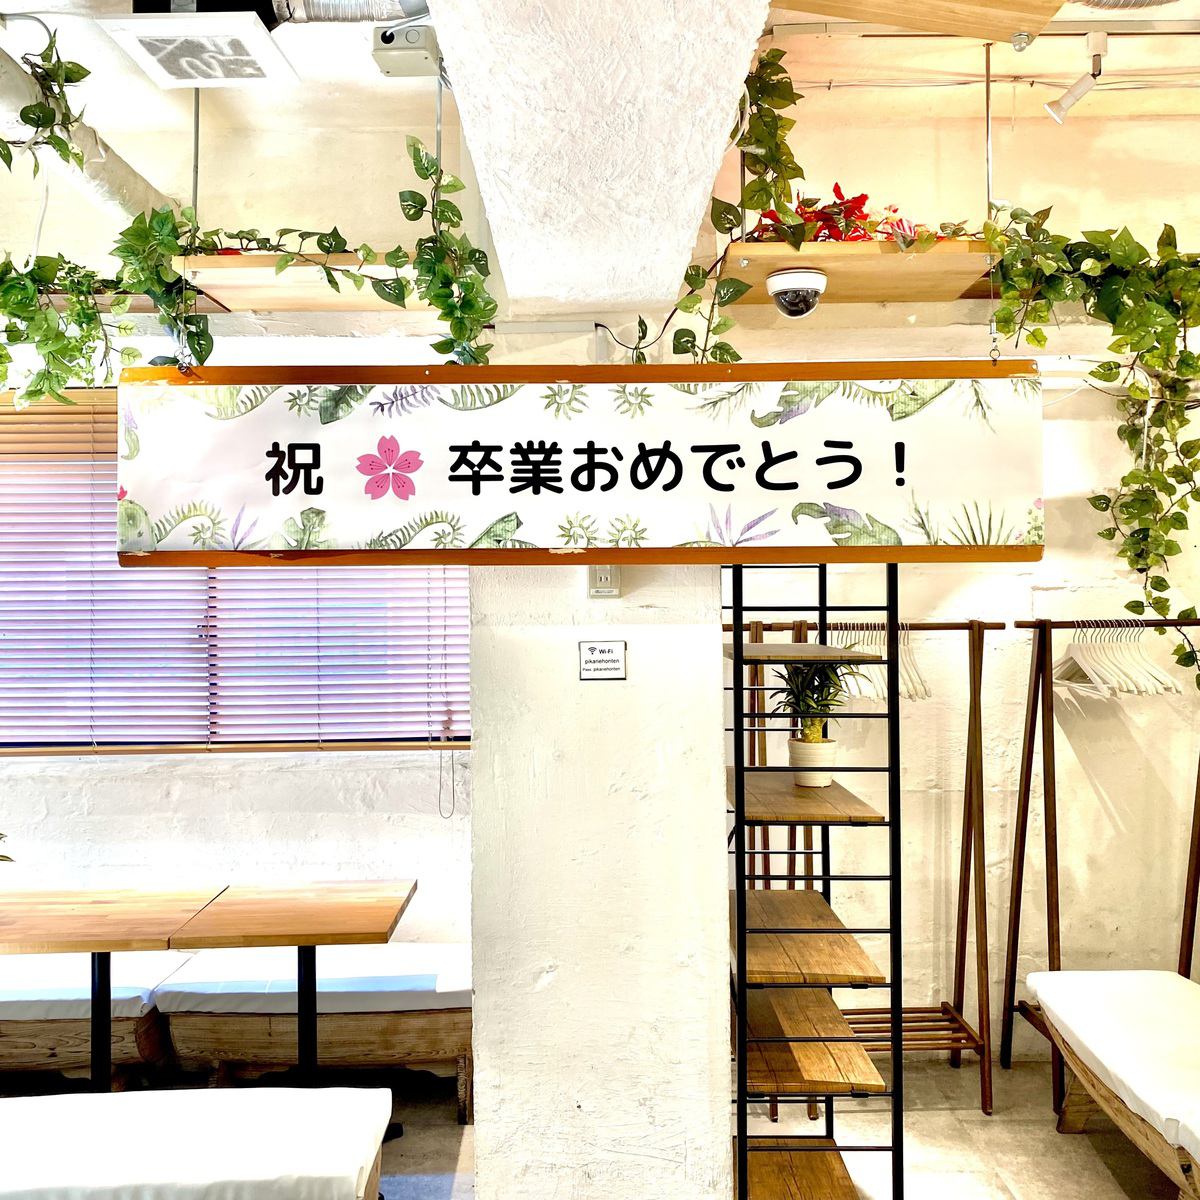 We have many options for private parties such as creating banners!Enjoy your private party with Shibuya's most abundant options (*^^*) Examples of private parties → year-end parties, new year parties, catch-up parties, welcome and farewell parties, etc.